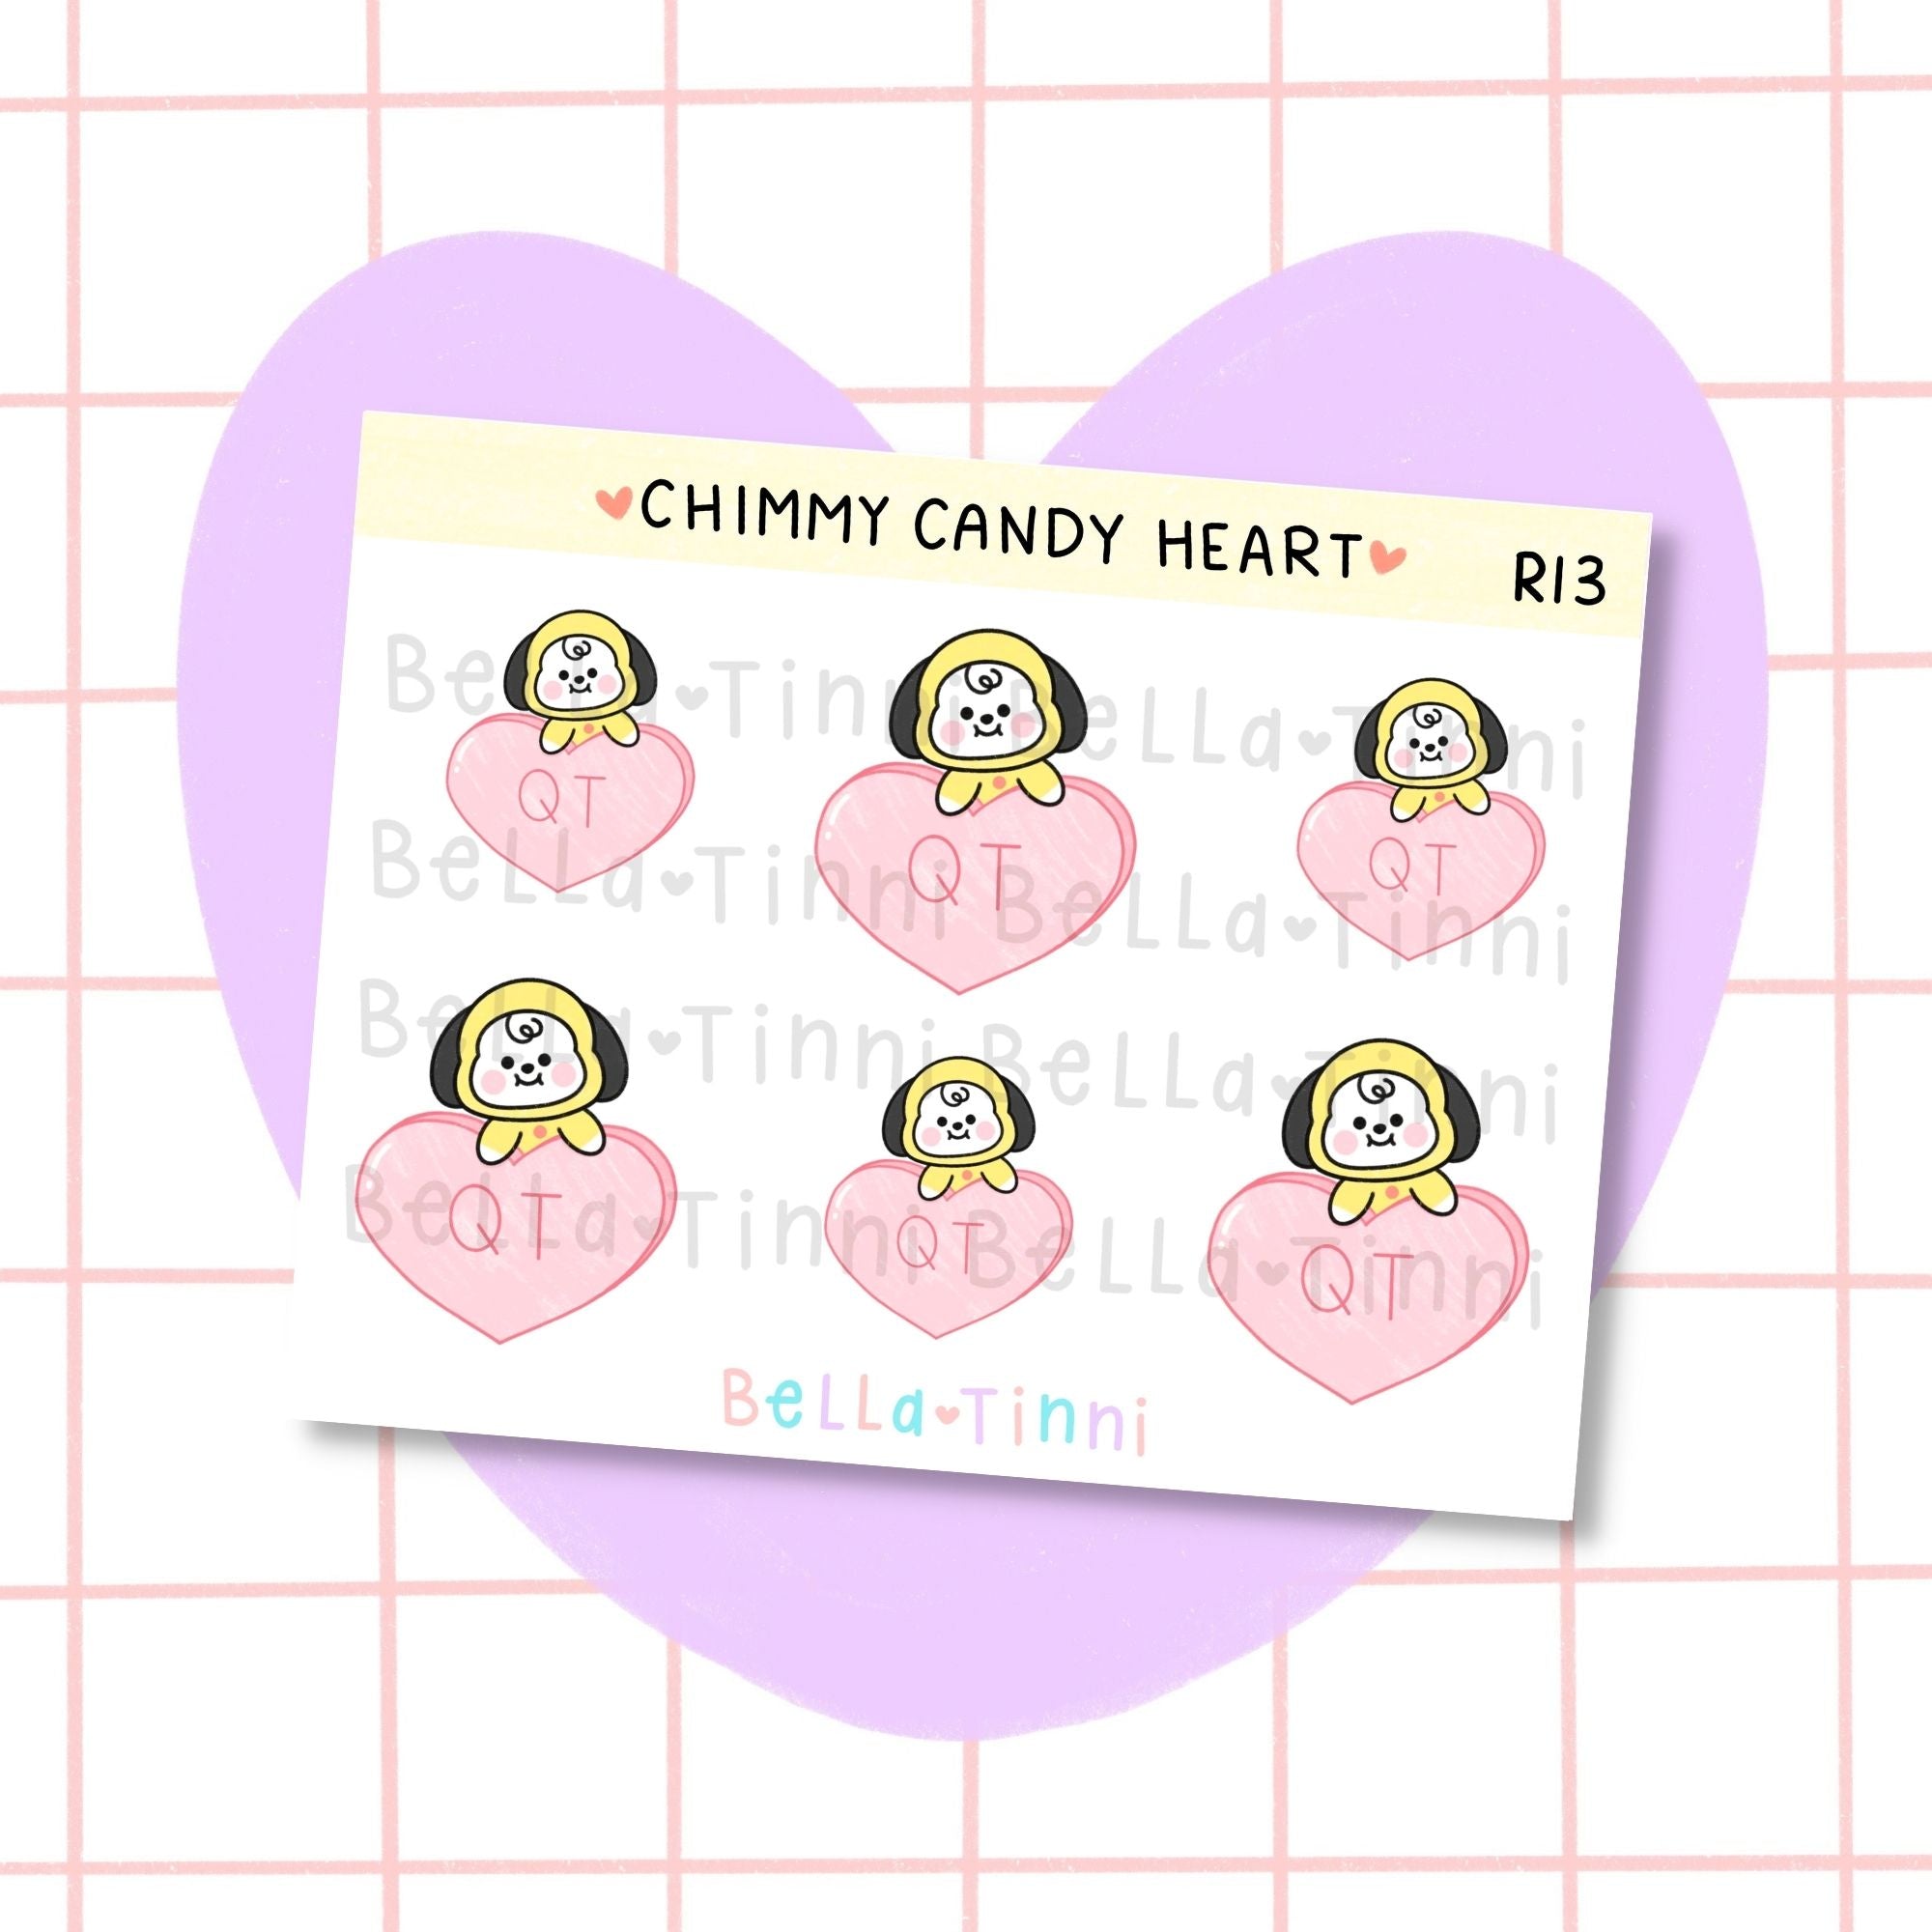 Chimmy Candy Heart - R13